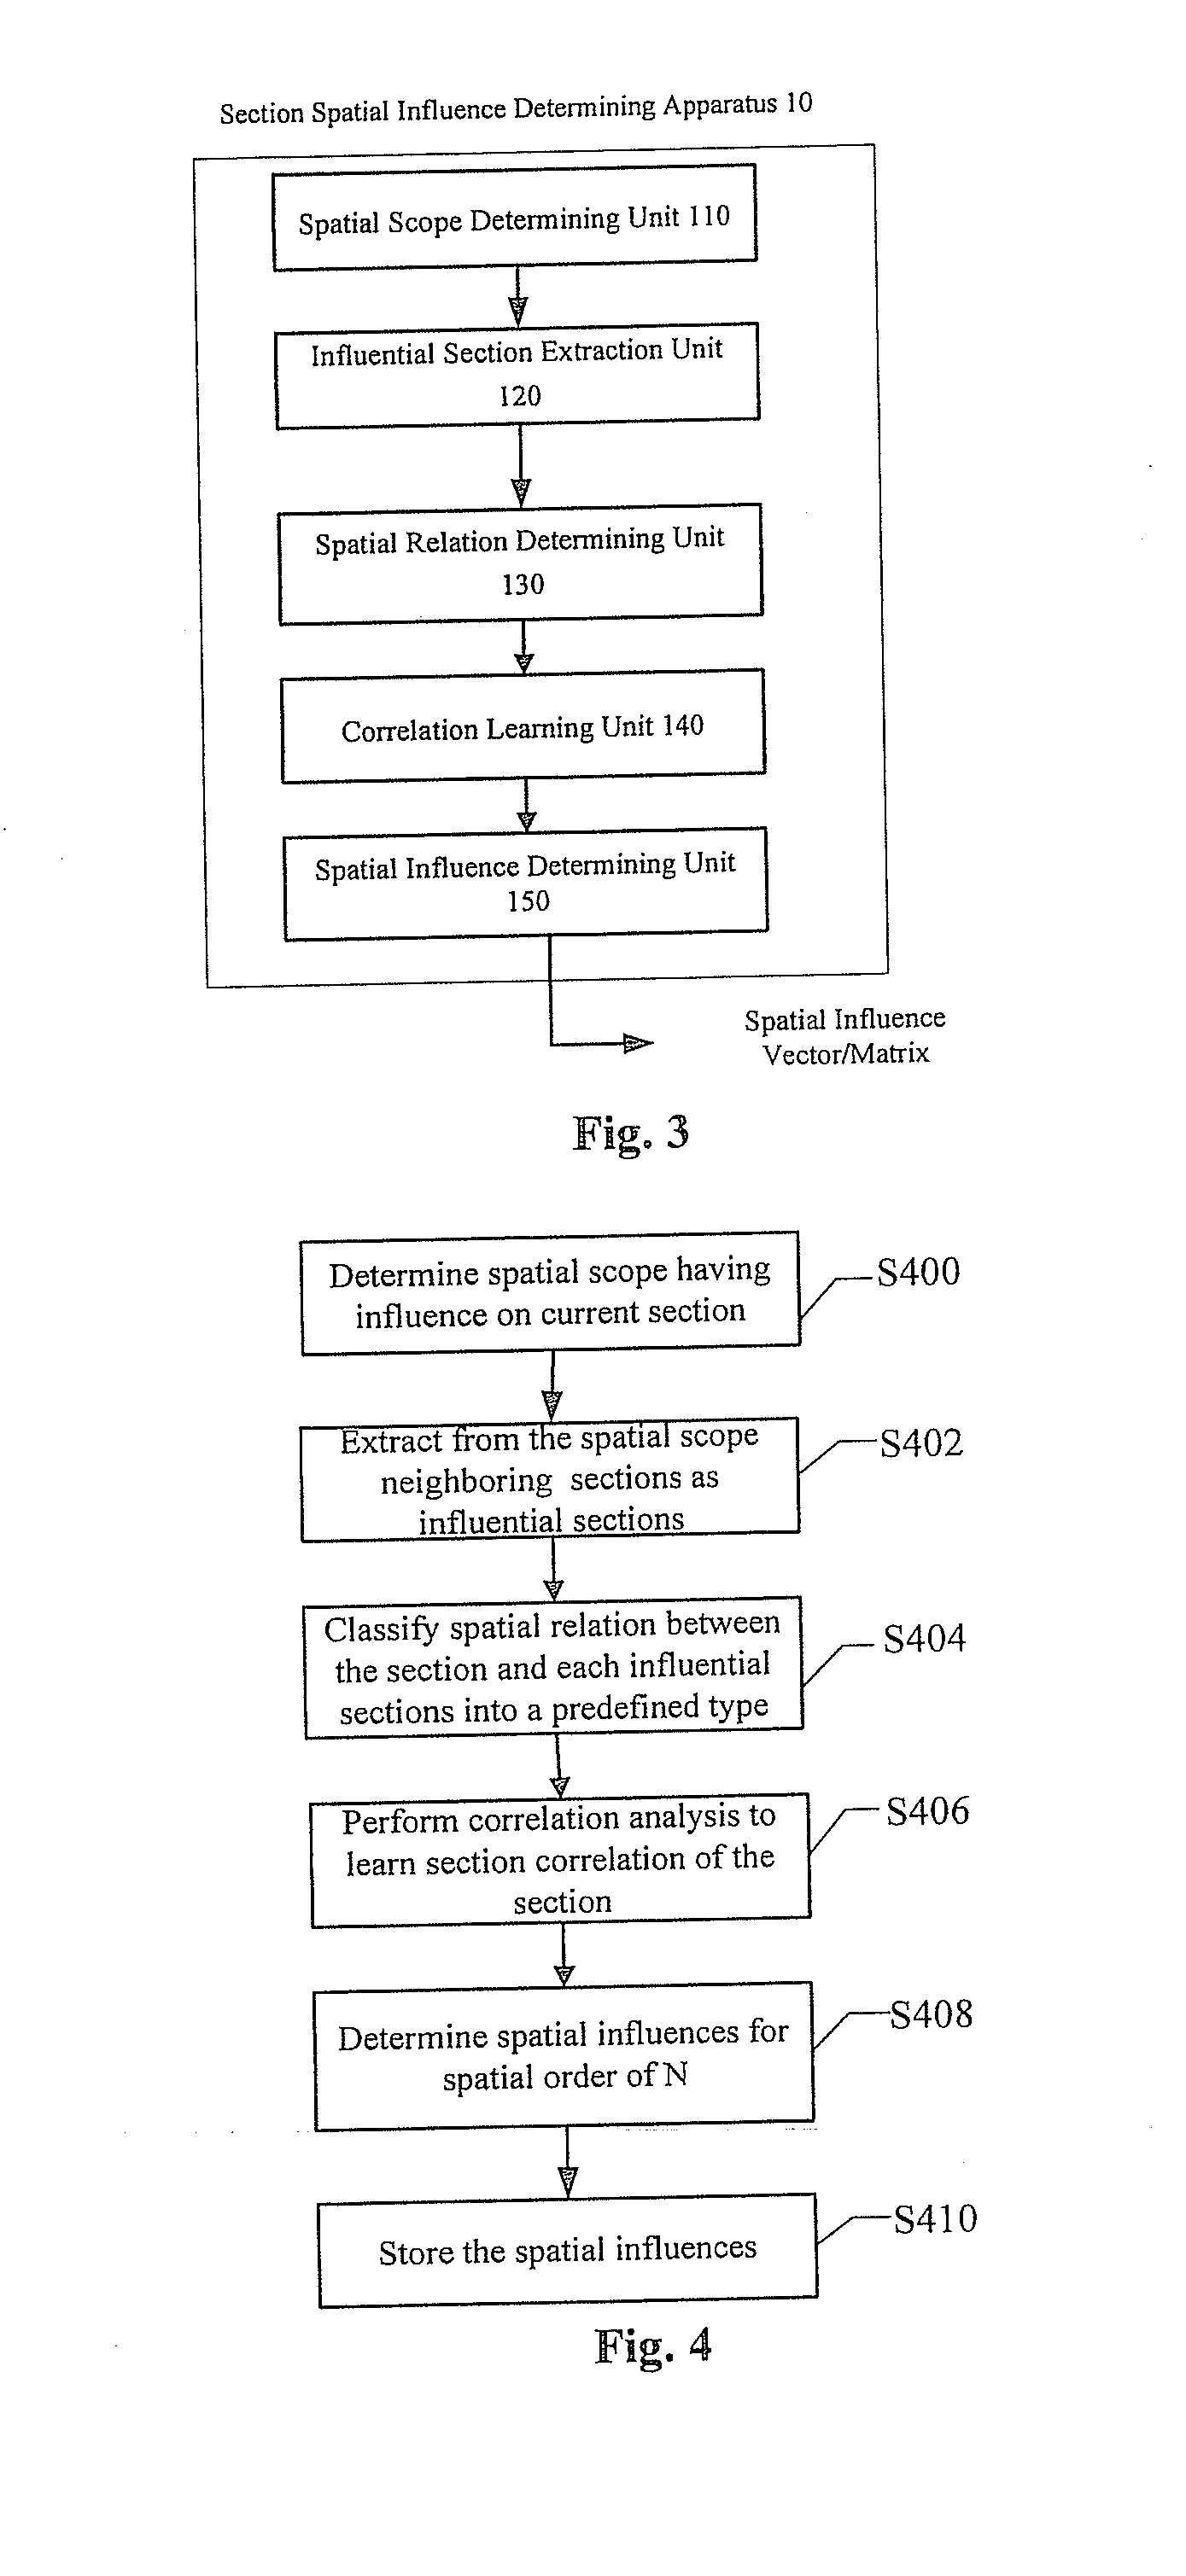 Method and system for traffic prediction based on space-time relation